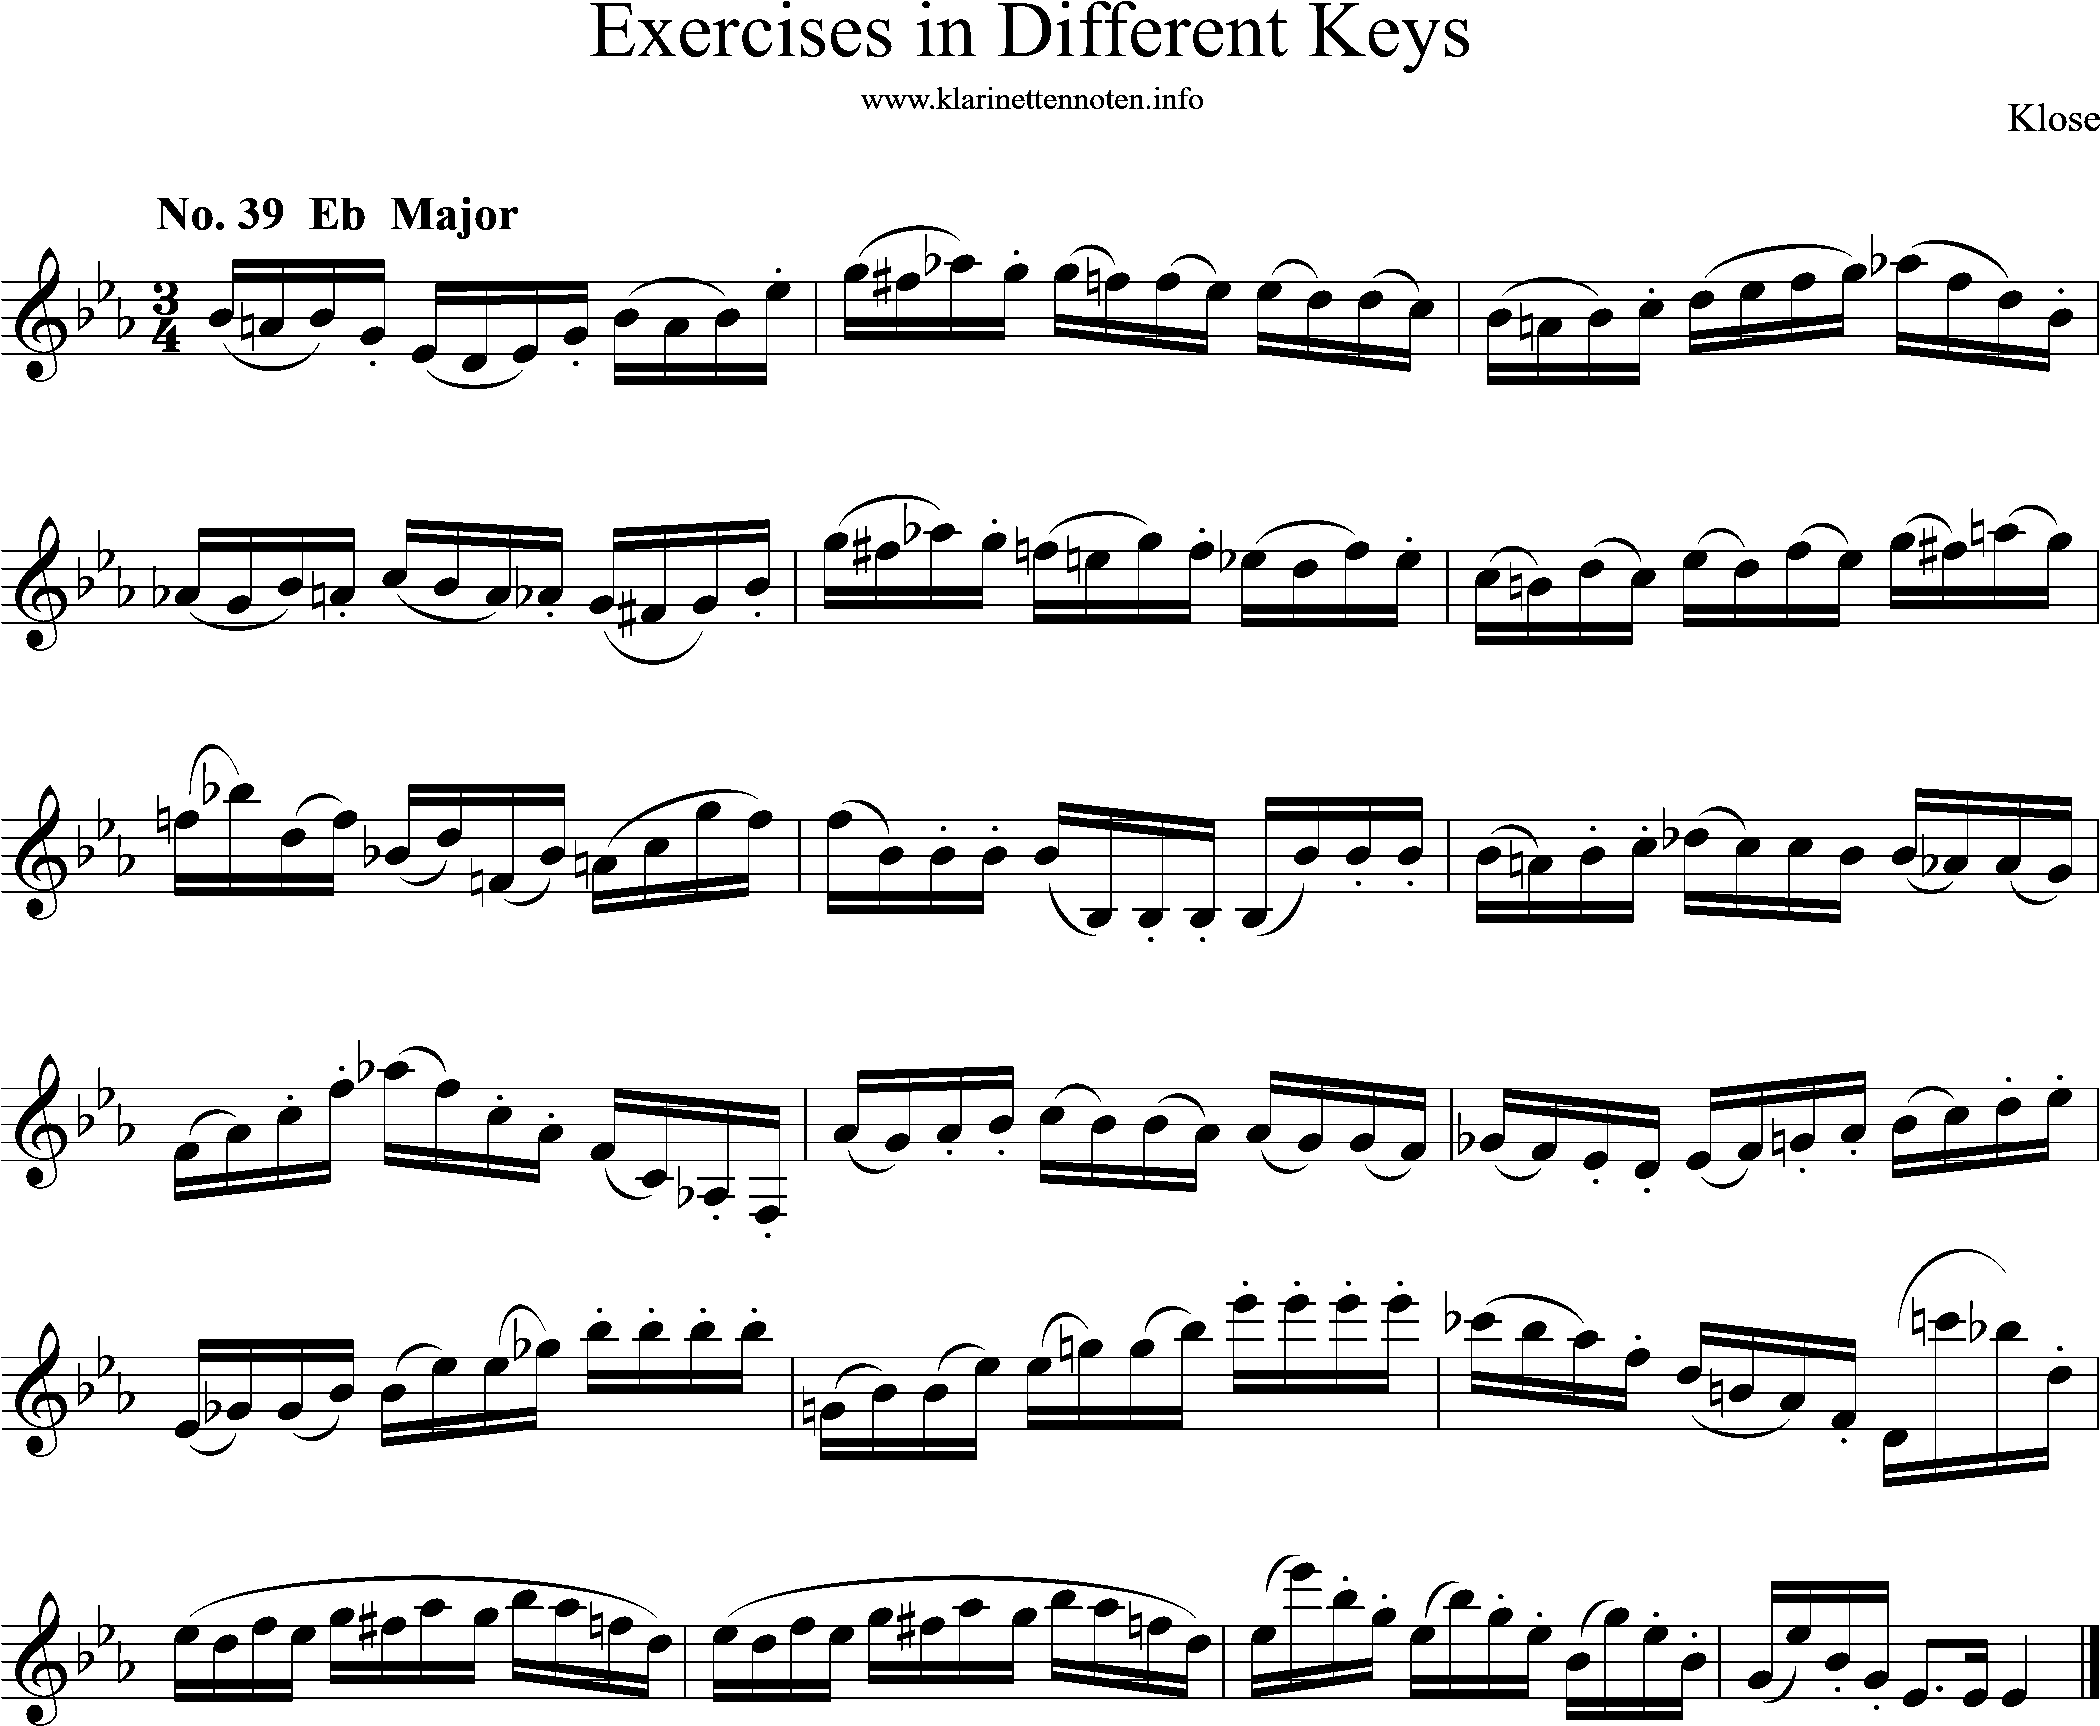 Exercises in Differewnt Keys, klose, No-39, Eb-Major